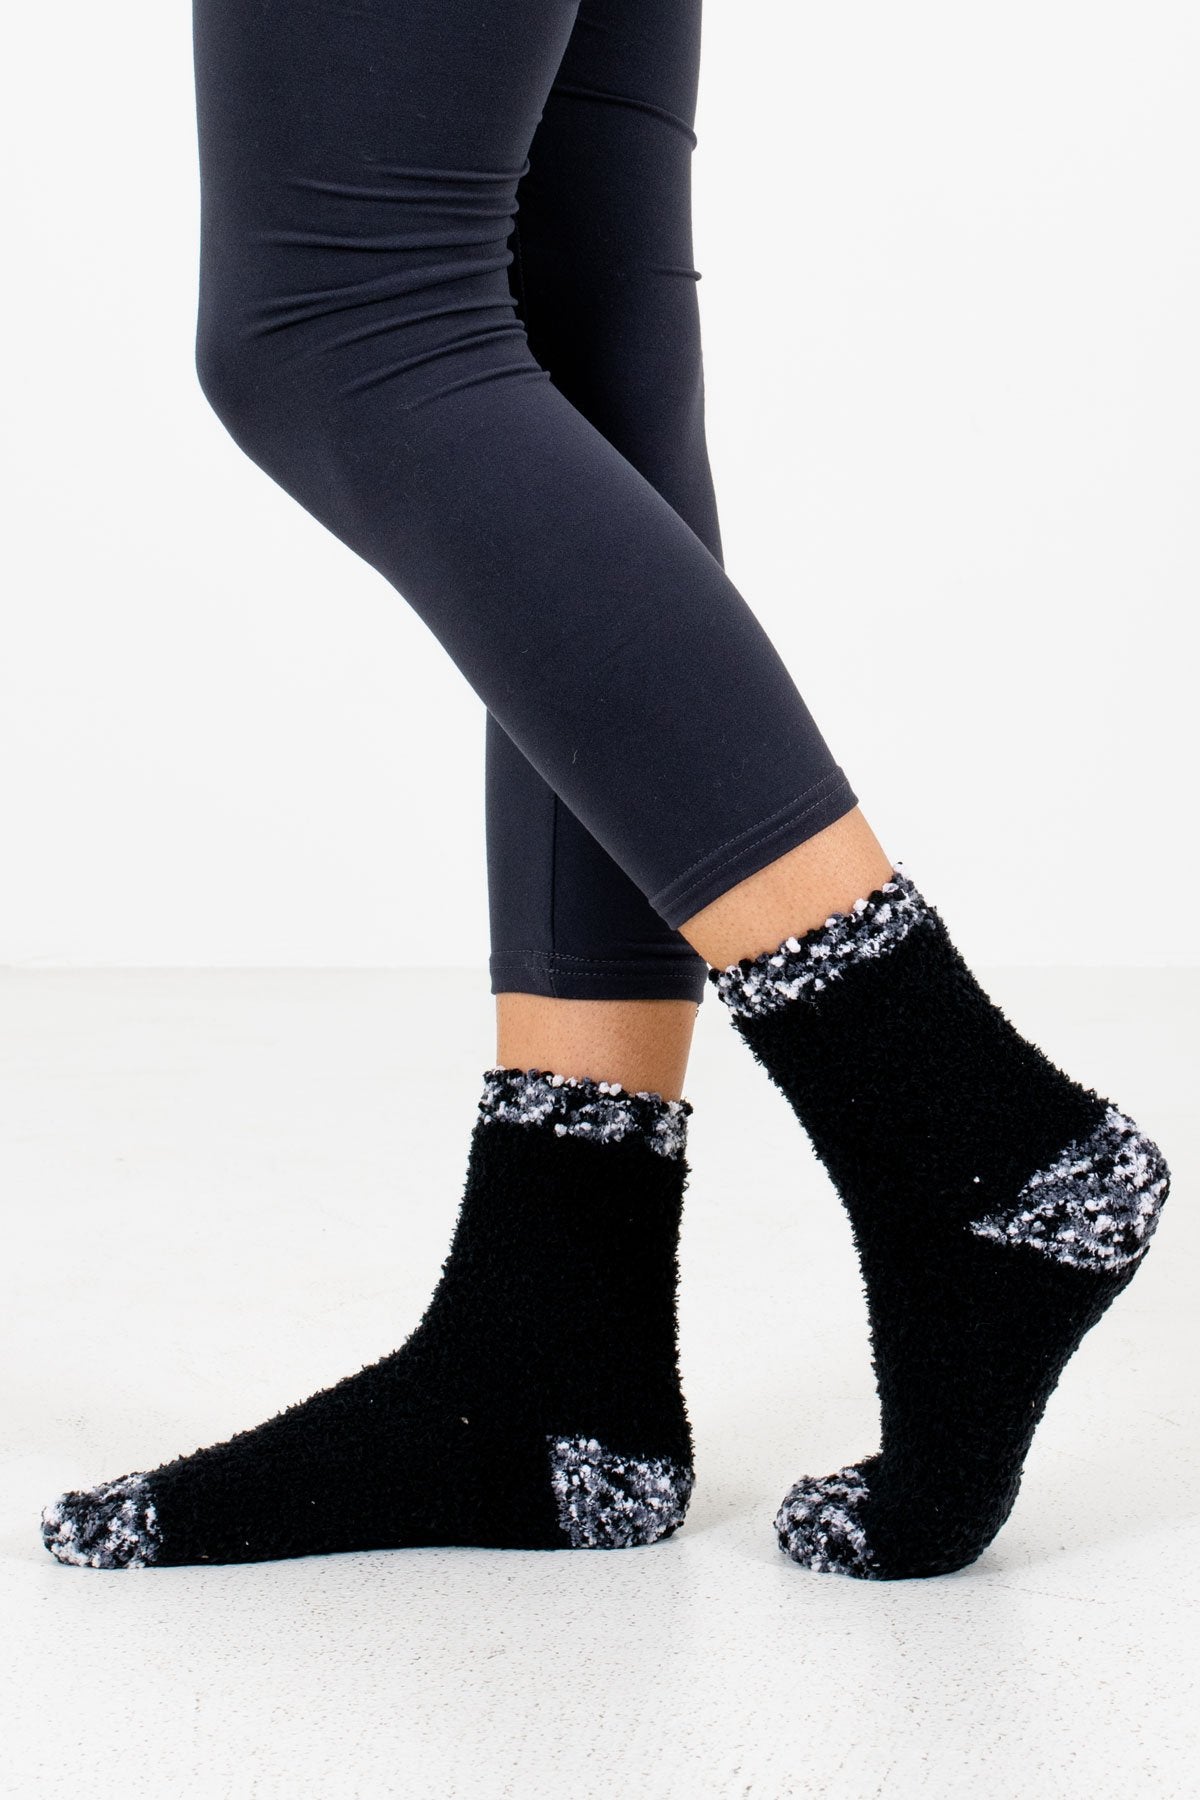 Black Cute and Cozy Boutique Socks for Women